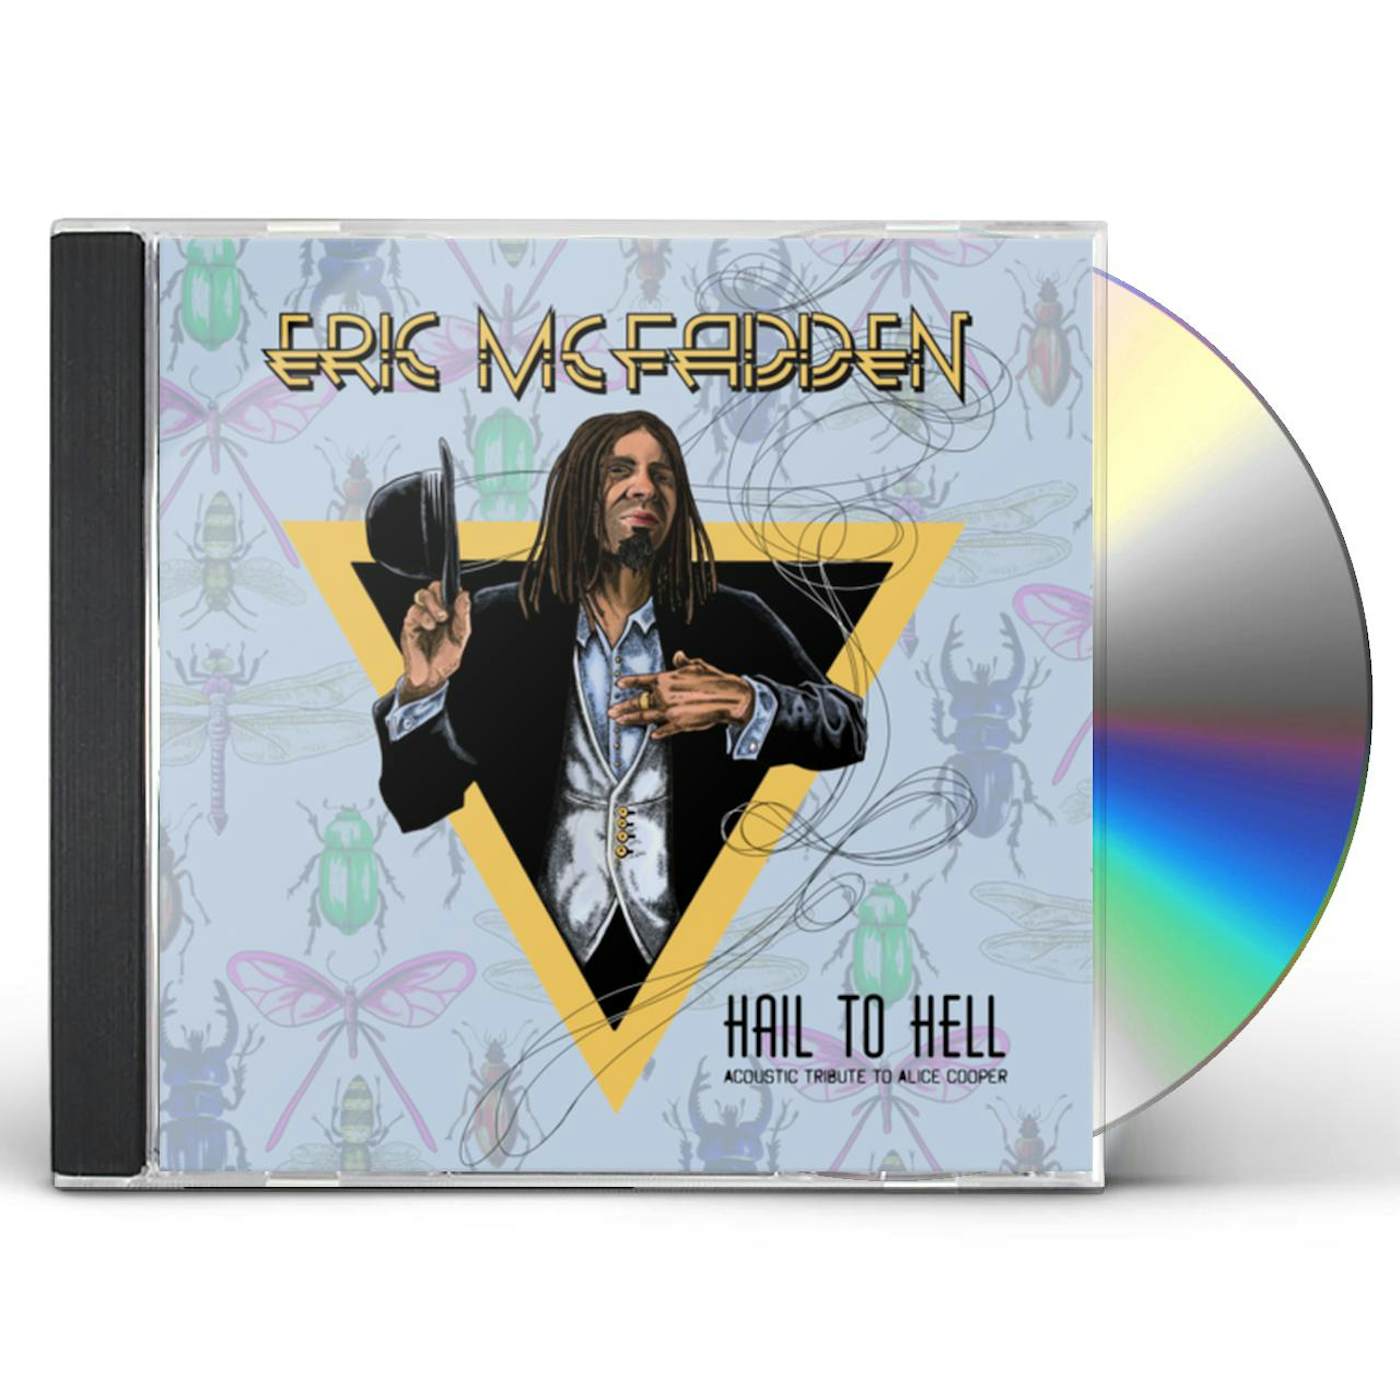 Eric McFadden HAIL TO HELL (ACOUSTIC TRIBUTE TO ALICE COOPER) CD